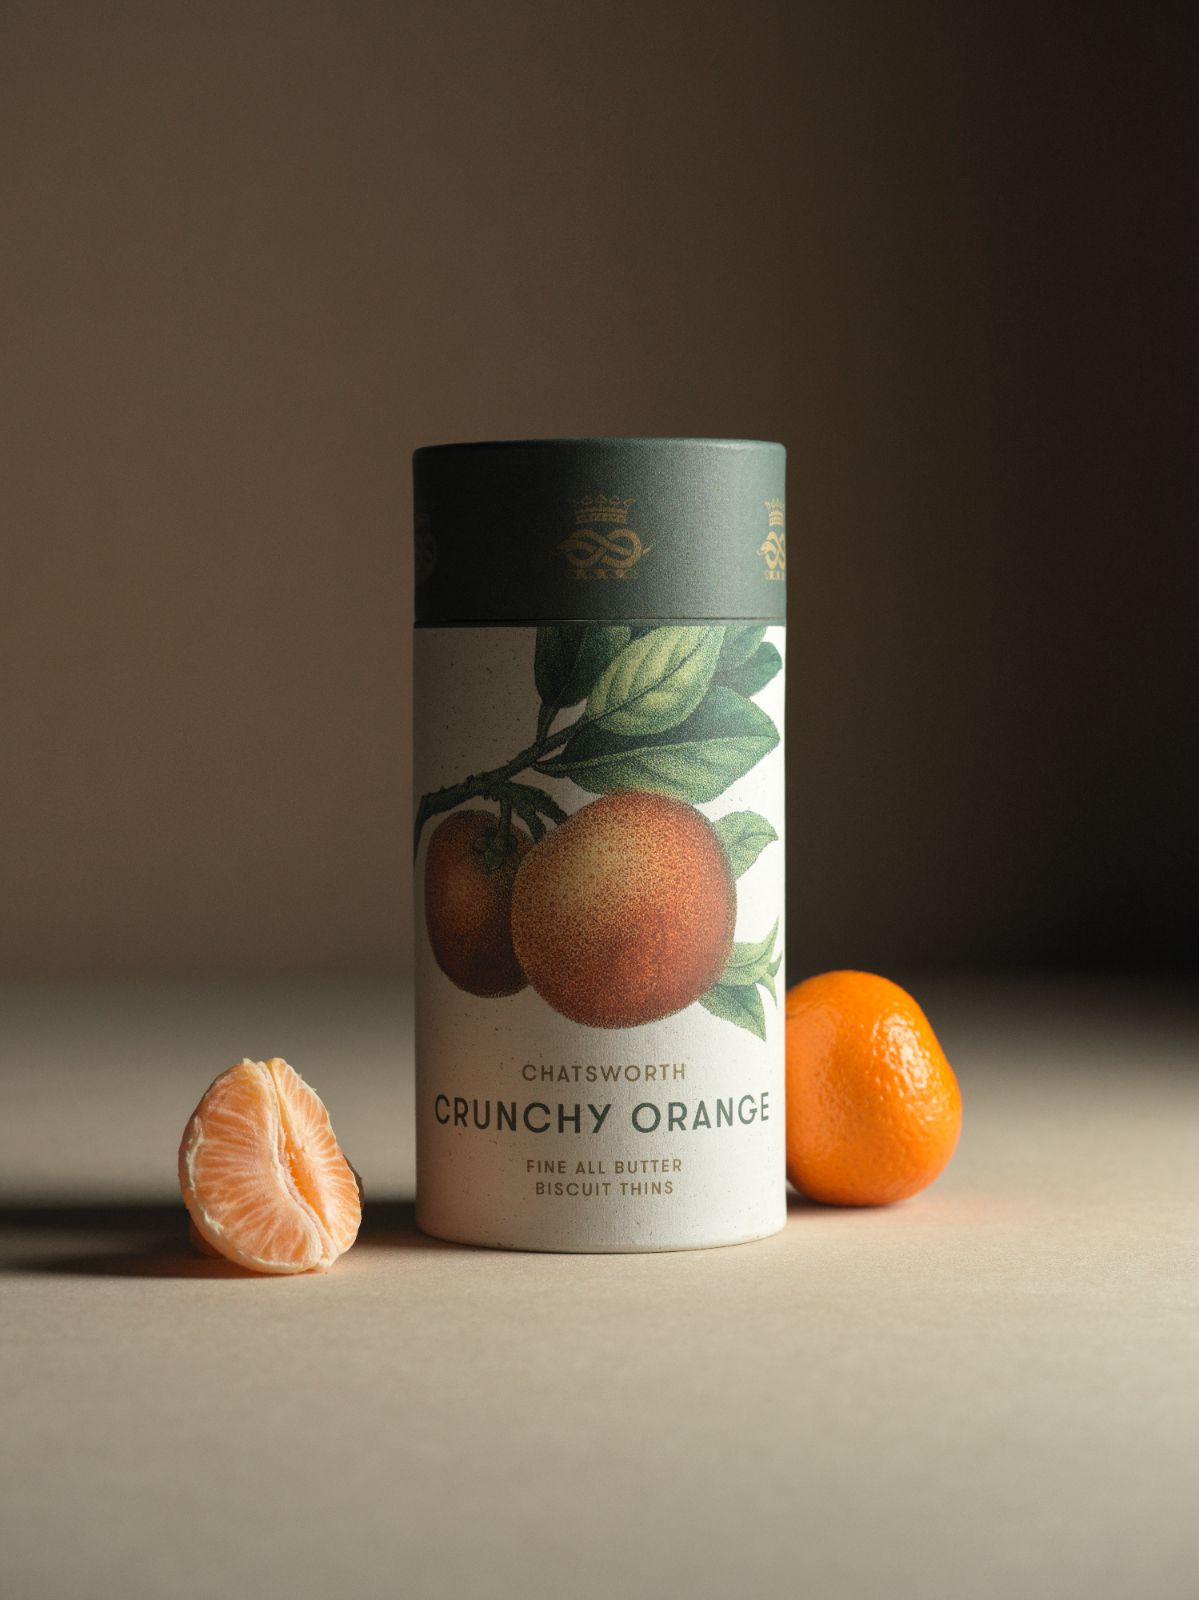 Orange Chatsworth Artisan Biscuits. Vertical packaging with botanical illustrations across the side.